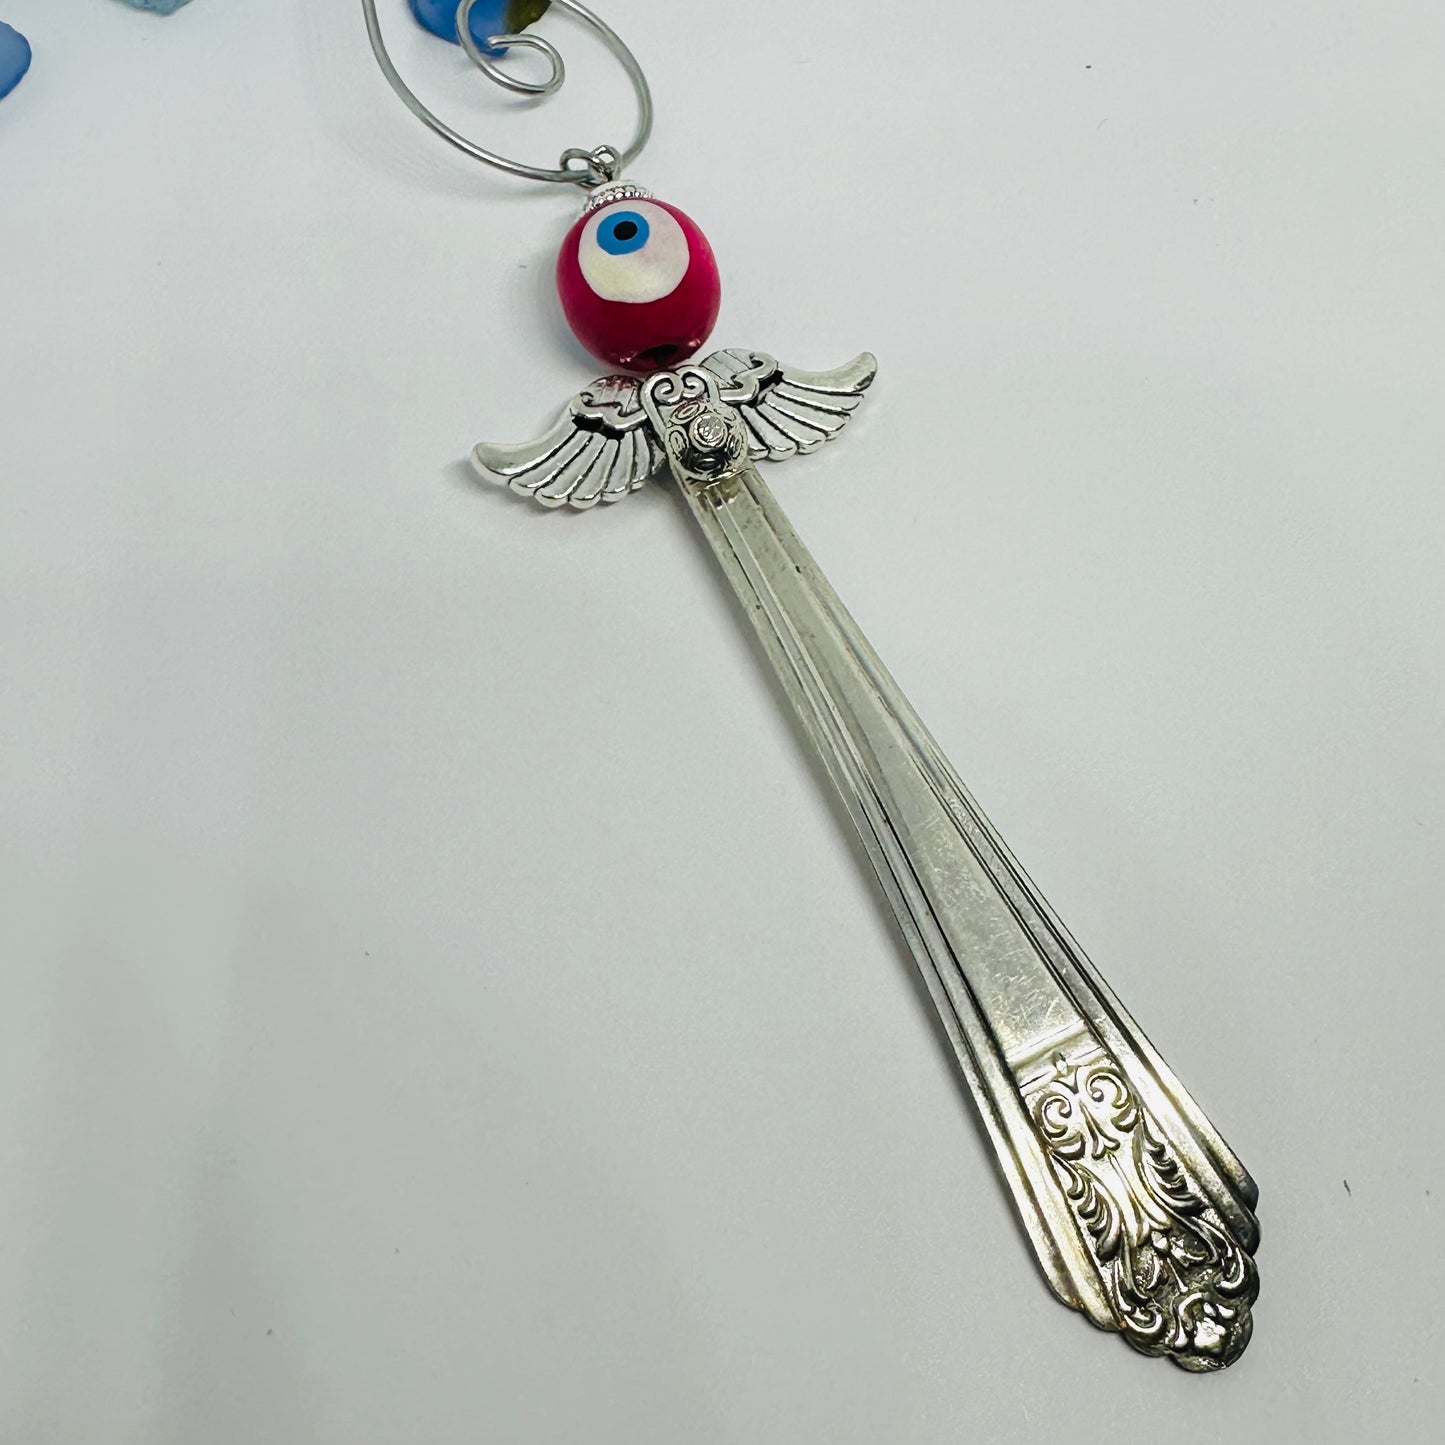 Angel Ornaments and Pendants made with Vintage Silverware